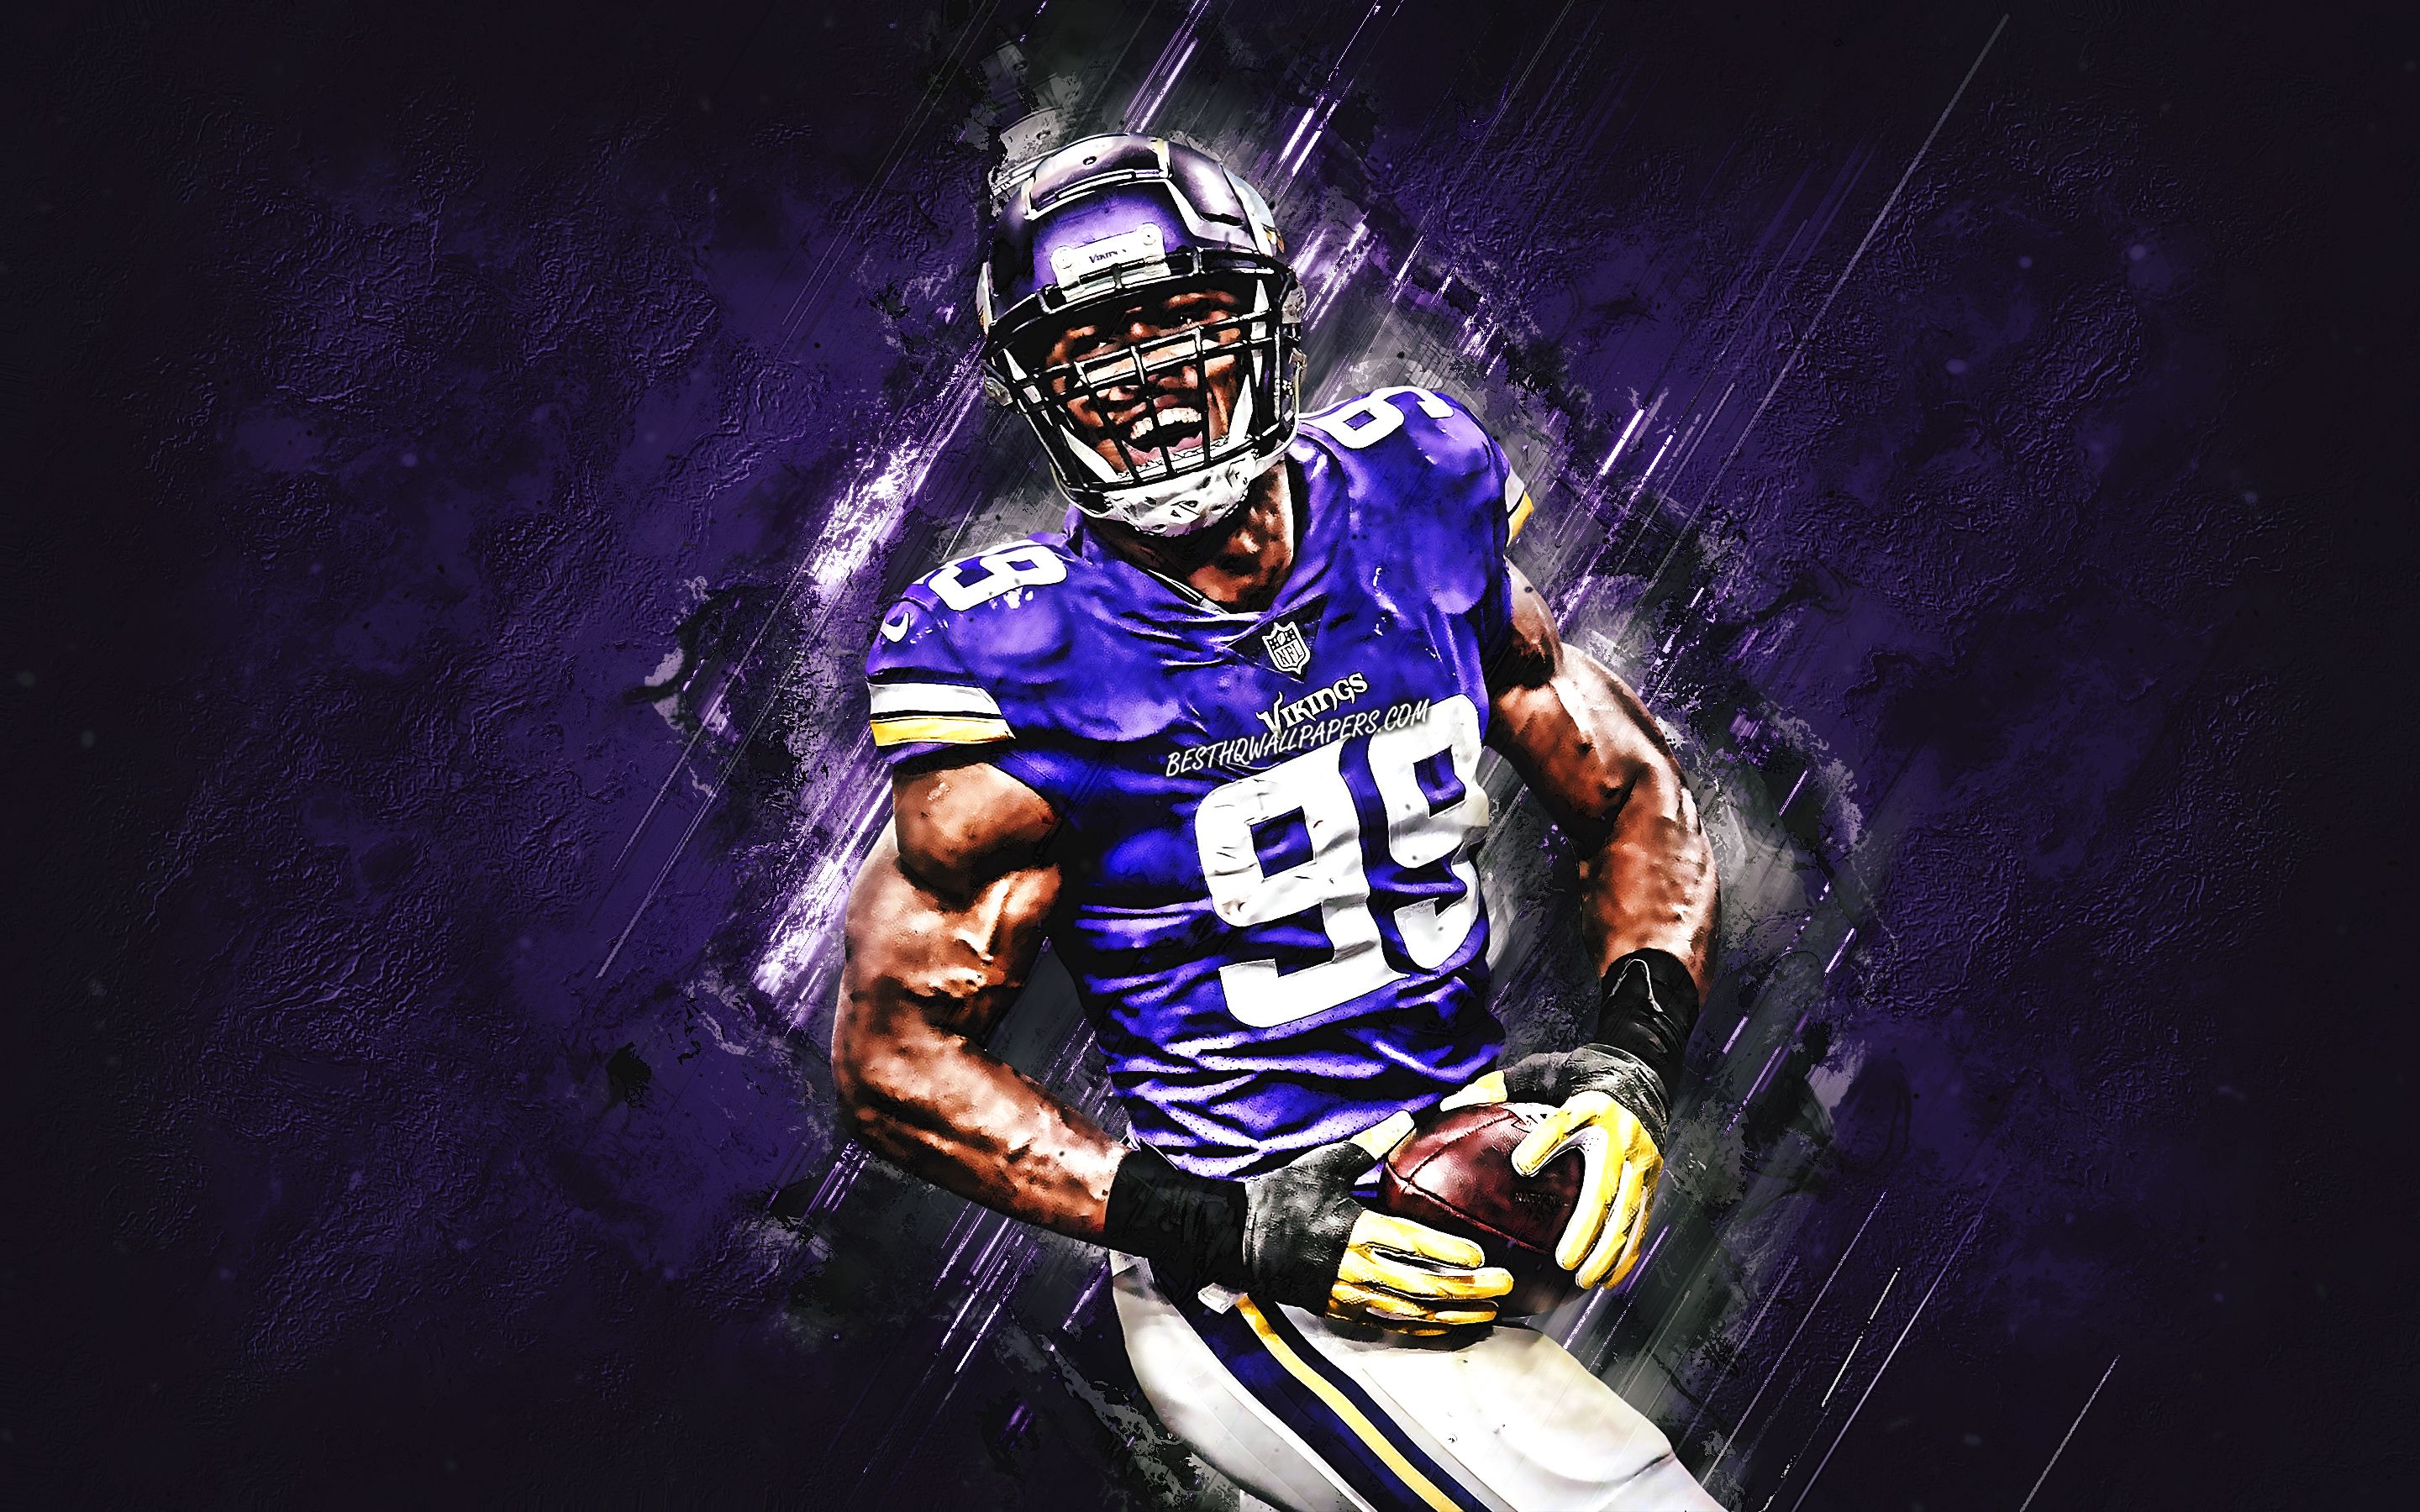 Download wallpaper Danielle Hunter, Minnesota Vikings, NFL, American football, portrait, purple stone background, National Football League for desktop with resolution 2880x1800. High Quality HD picture wallpaper